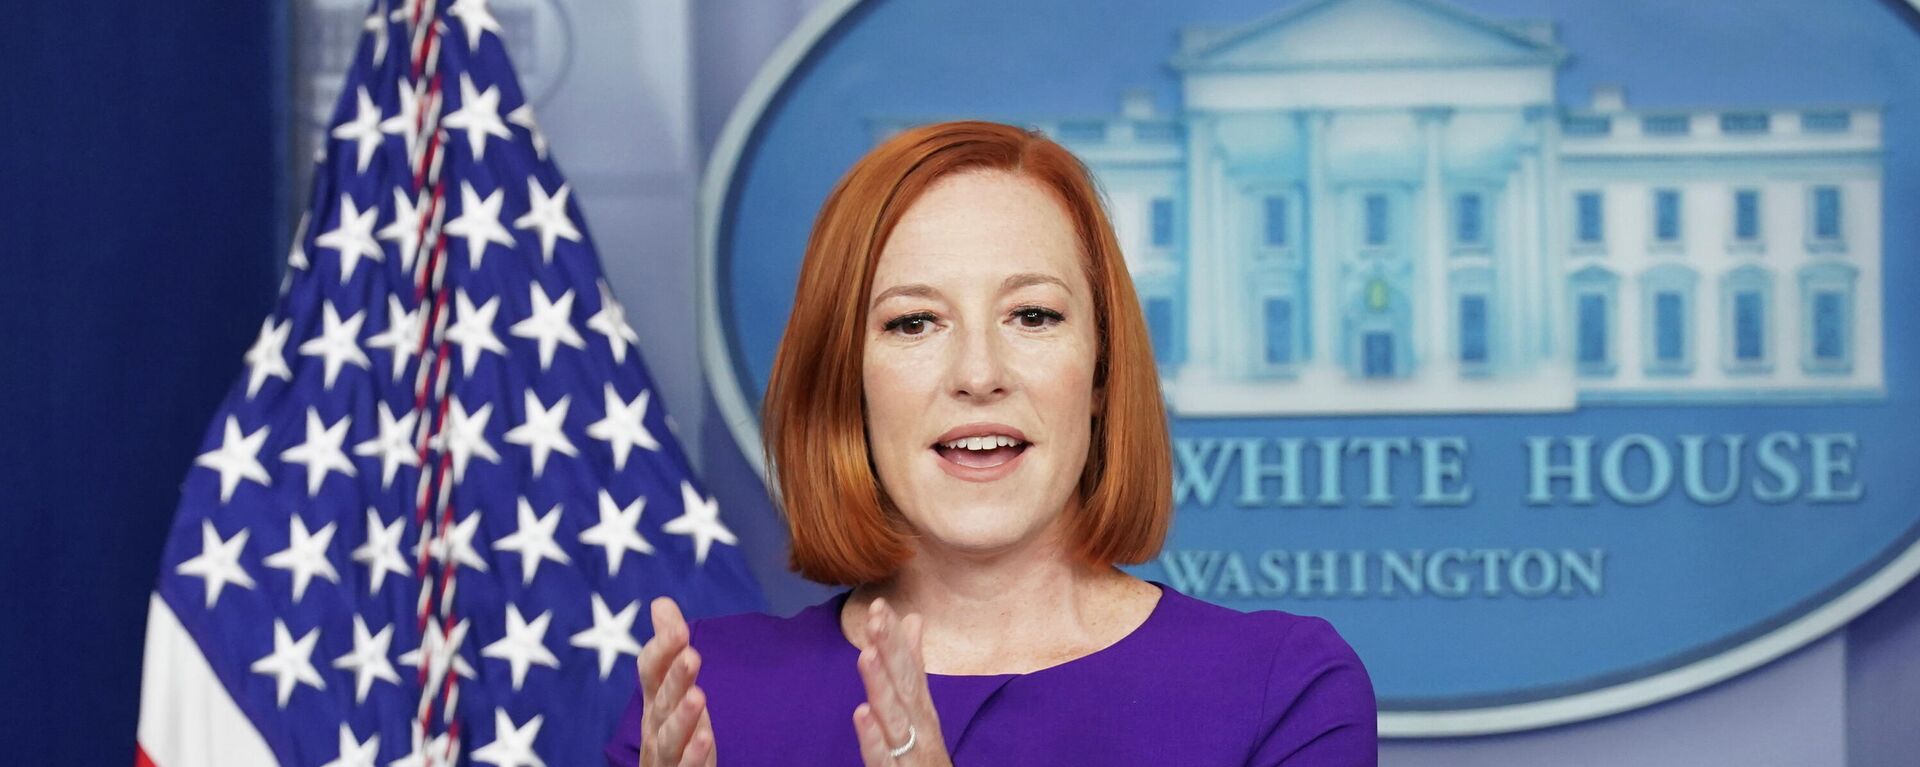 White House Press Secretary Jen Psaki, on her first day back after testing positive for COVID-19, speaks during a press briefing at the White House in Washington, U.S., November 12, 2021 - Sputnik International, 1920, 18.11.2021